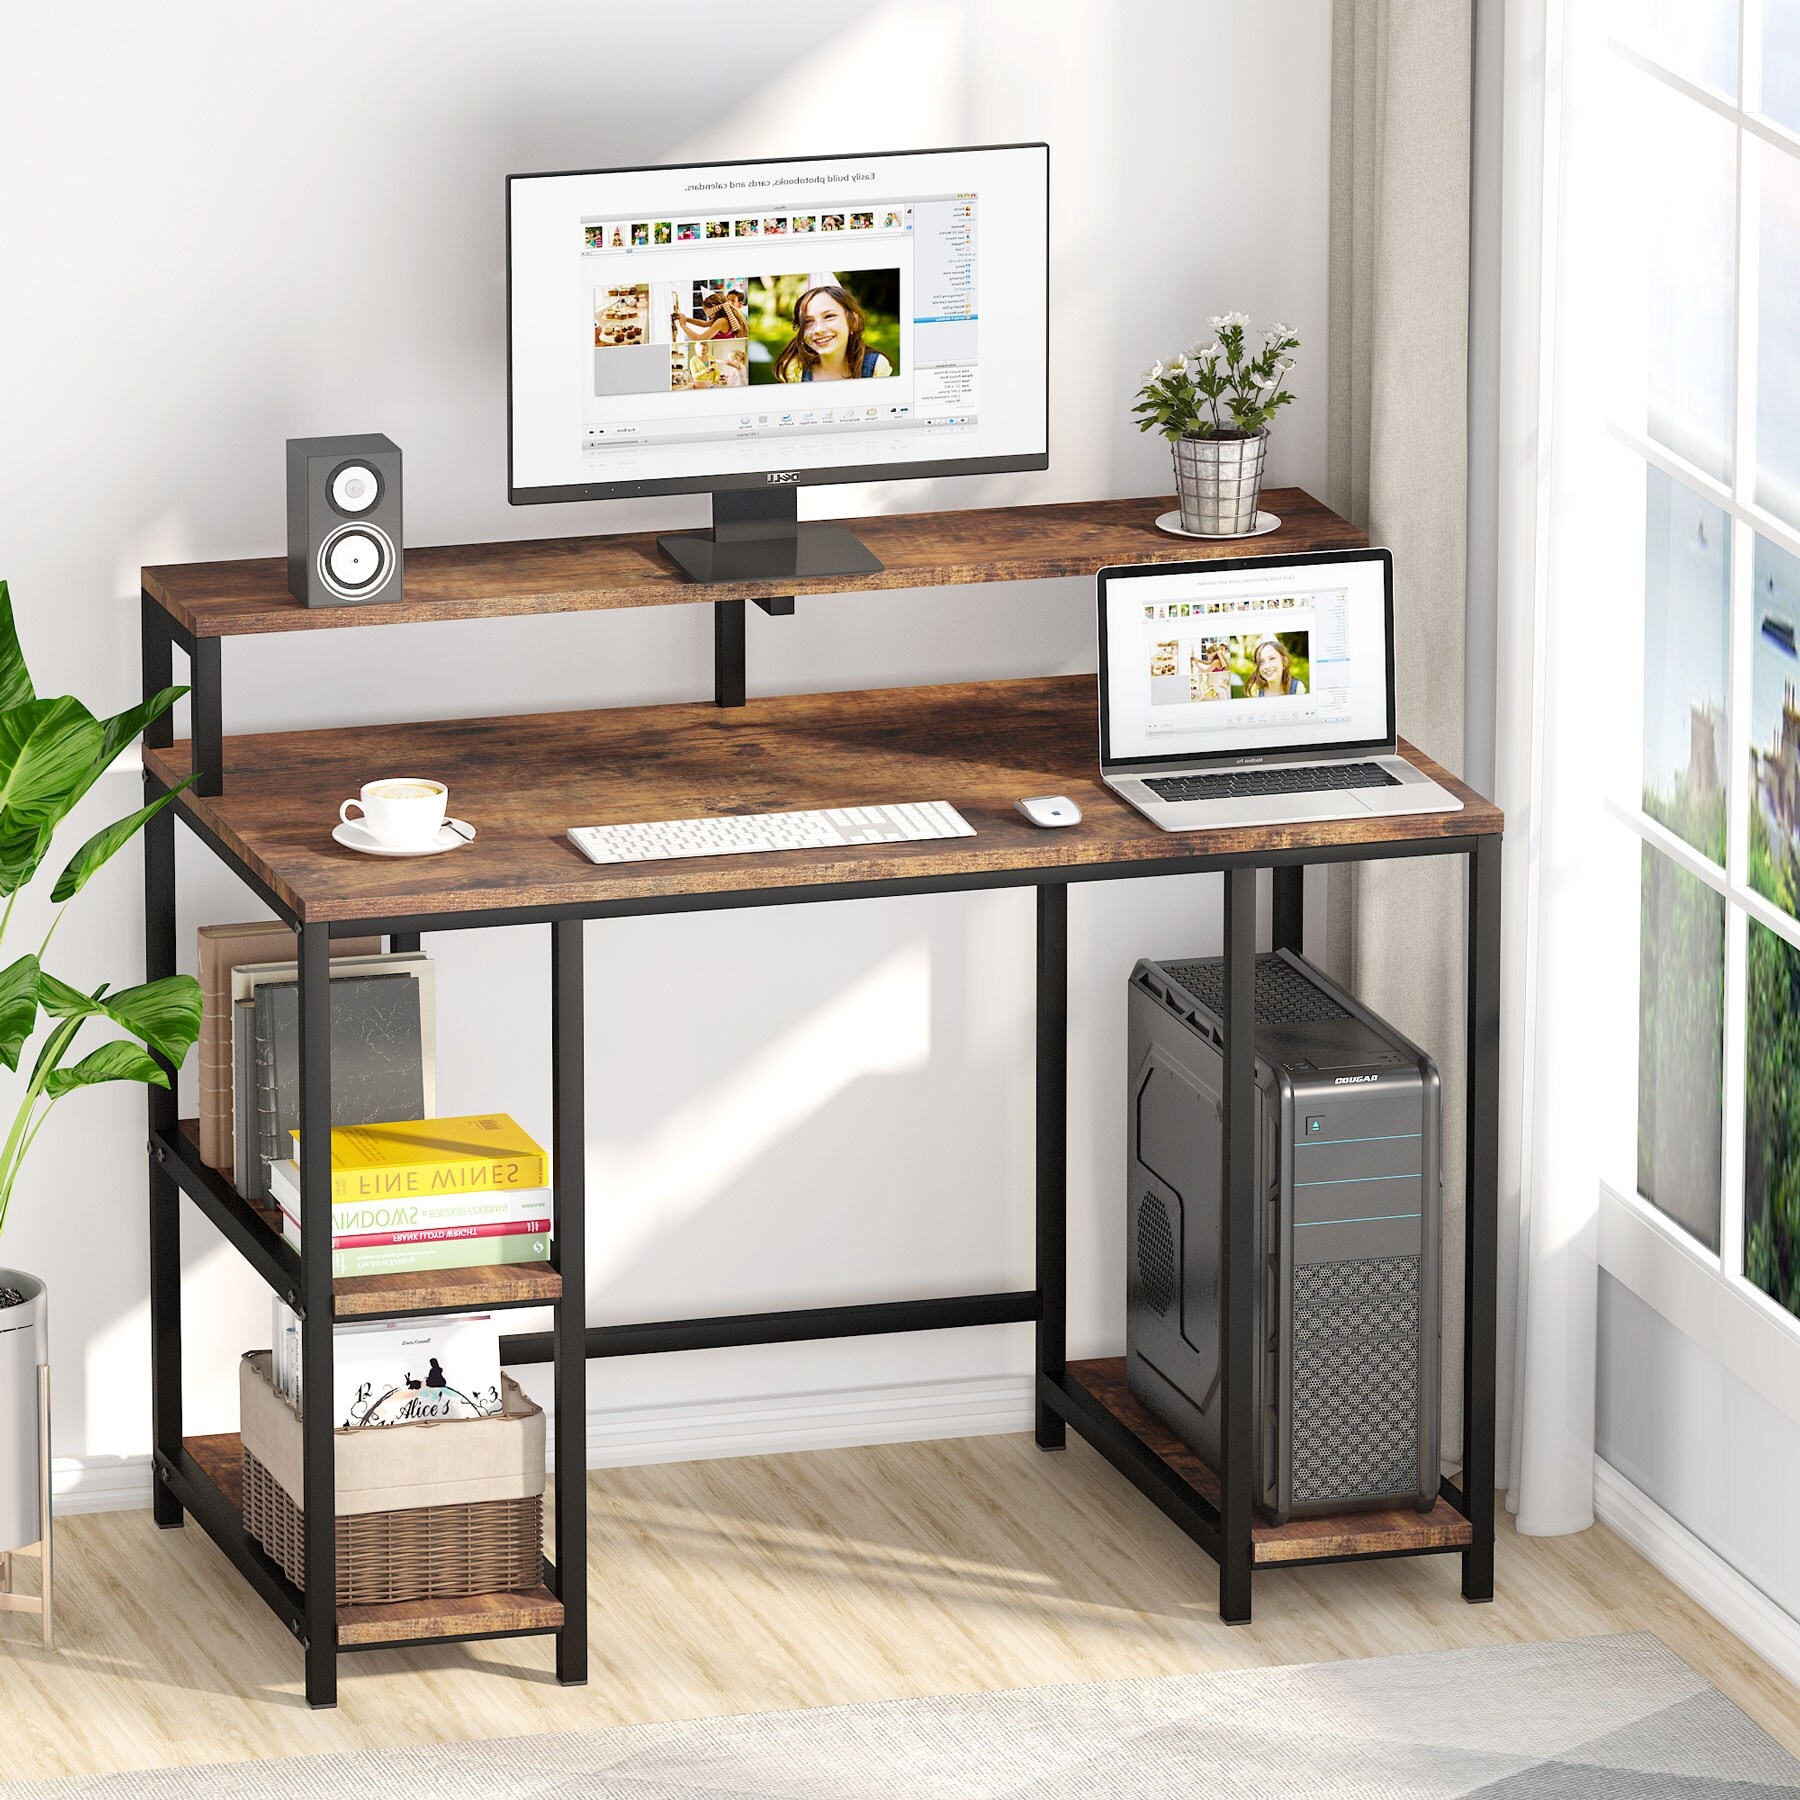 https://ak1.ostkcdn.com/images/products/is/images/direct/1c89774e4efab66e0c27222538e6d2e3bbf8b273/47%22-Computer-Desk-with-Monitor-Stand%2C-Study-Table-Writing-Desk-with-Shelf.jpg